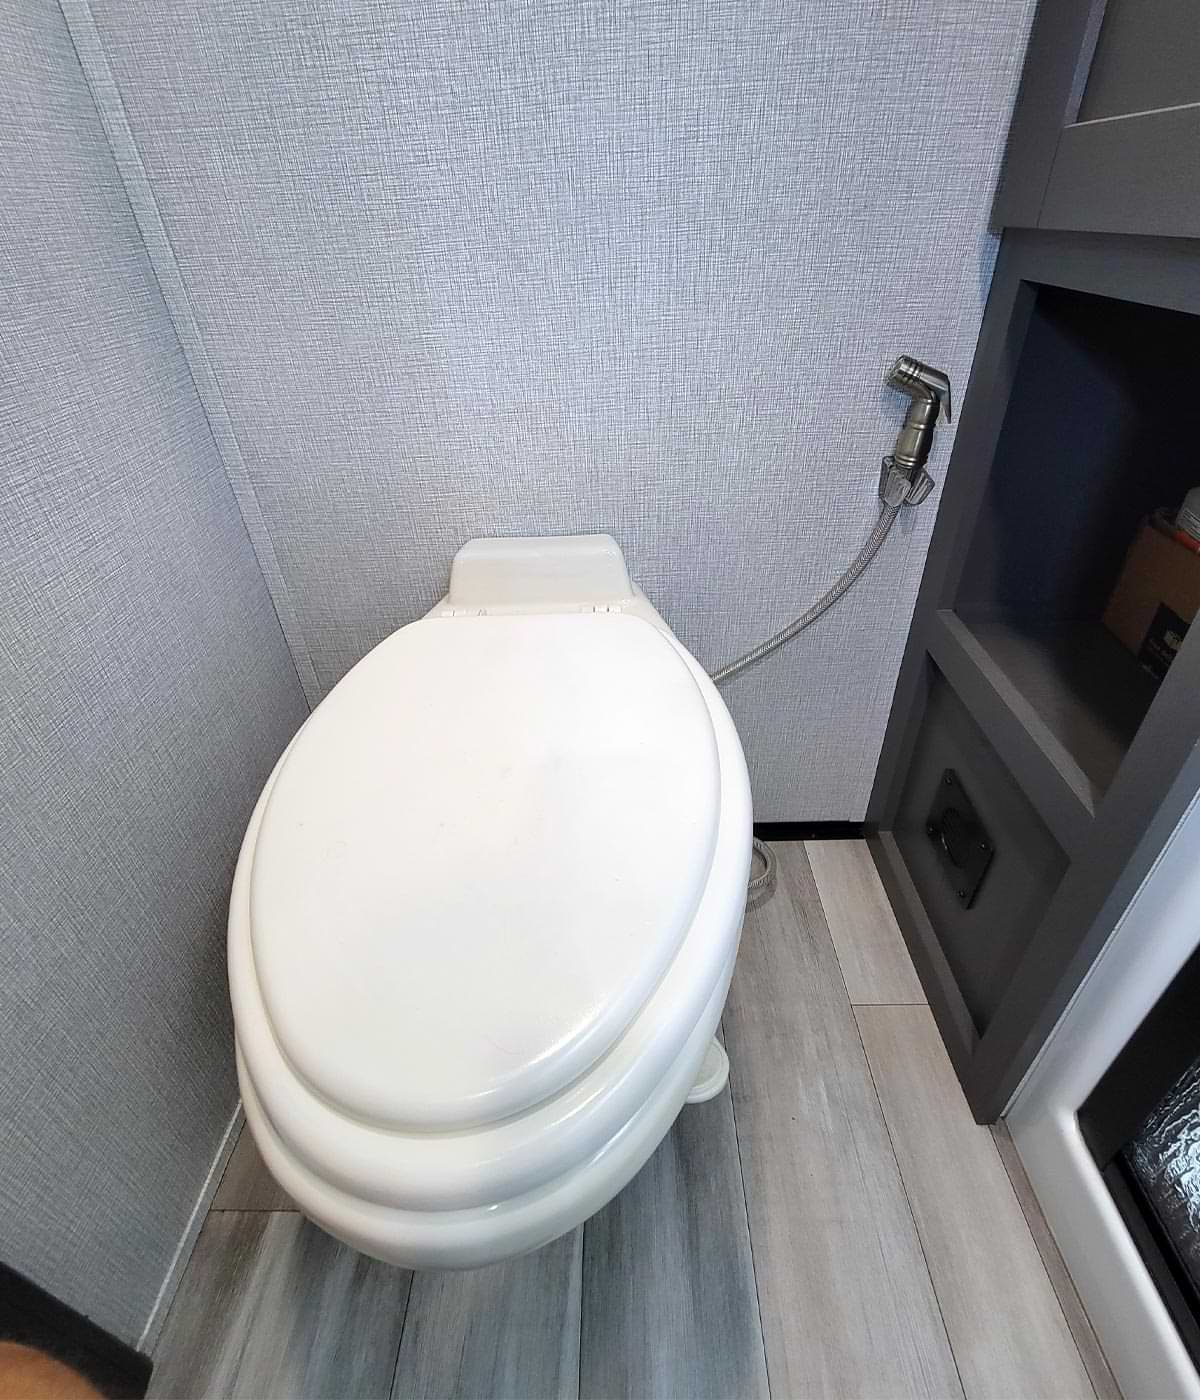 view of an RV toilet with the seat down